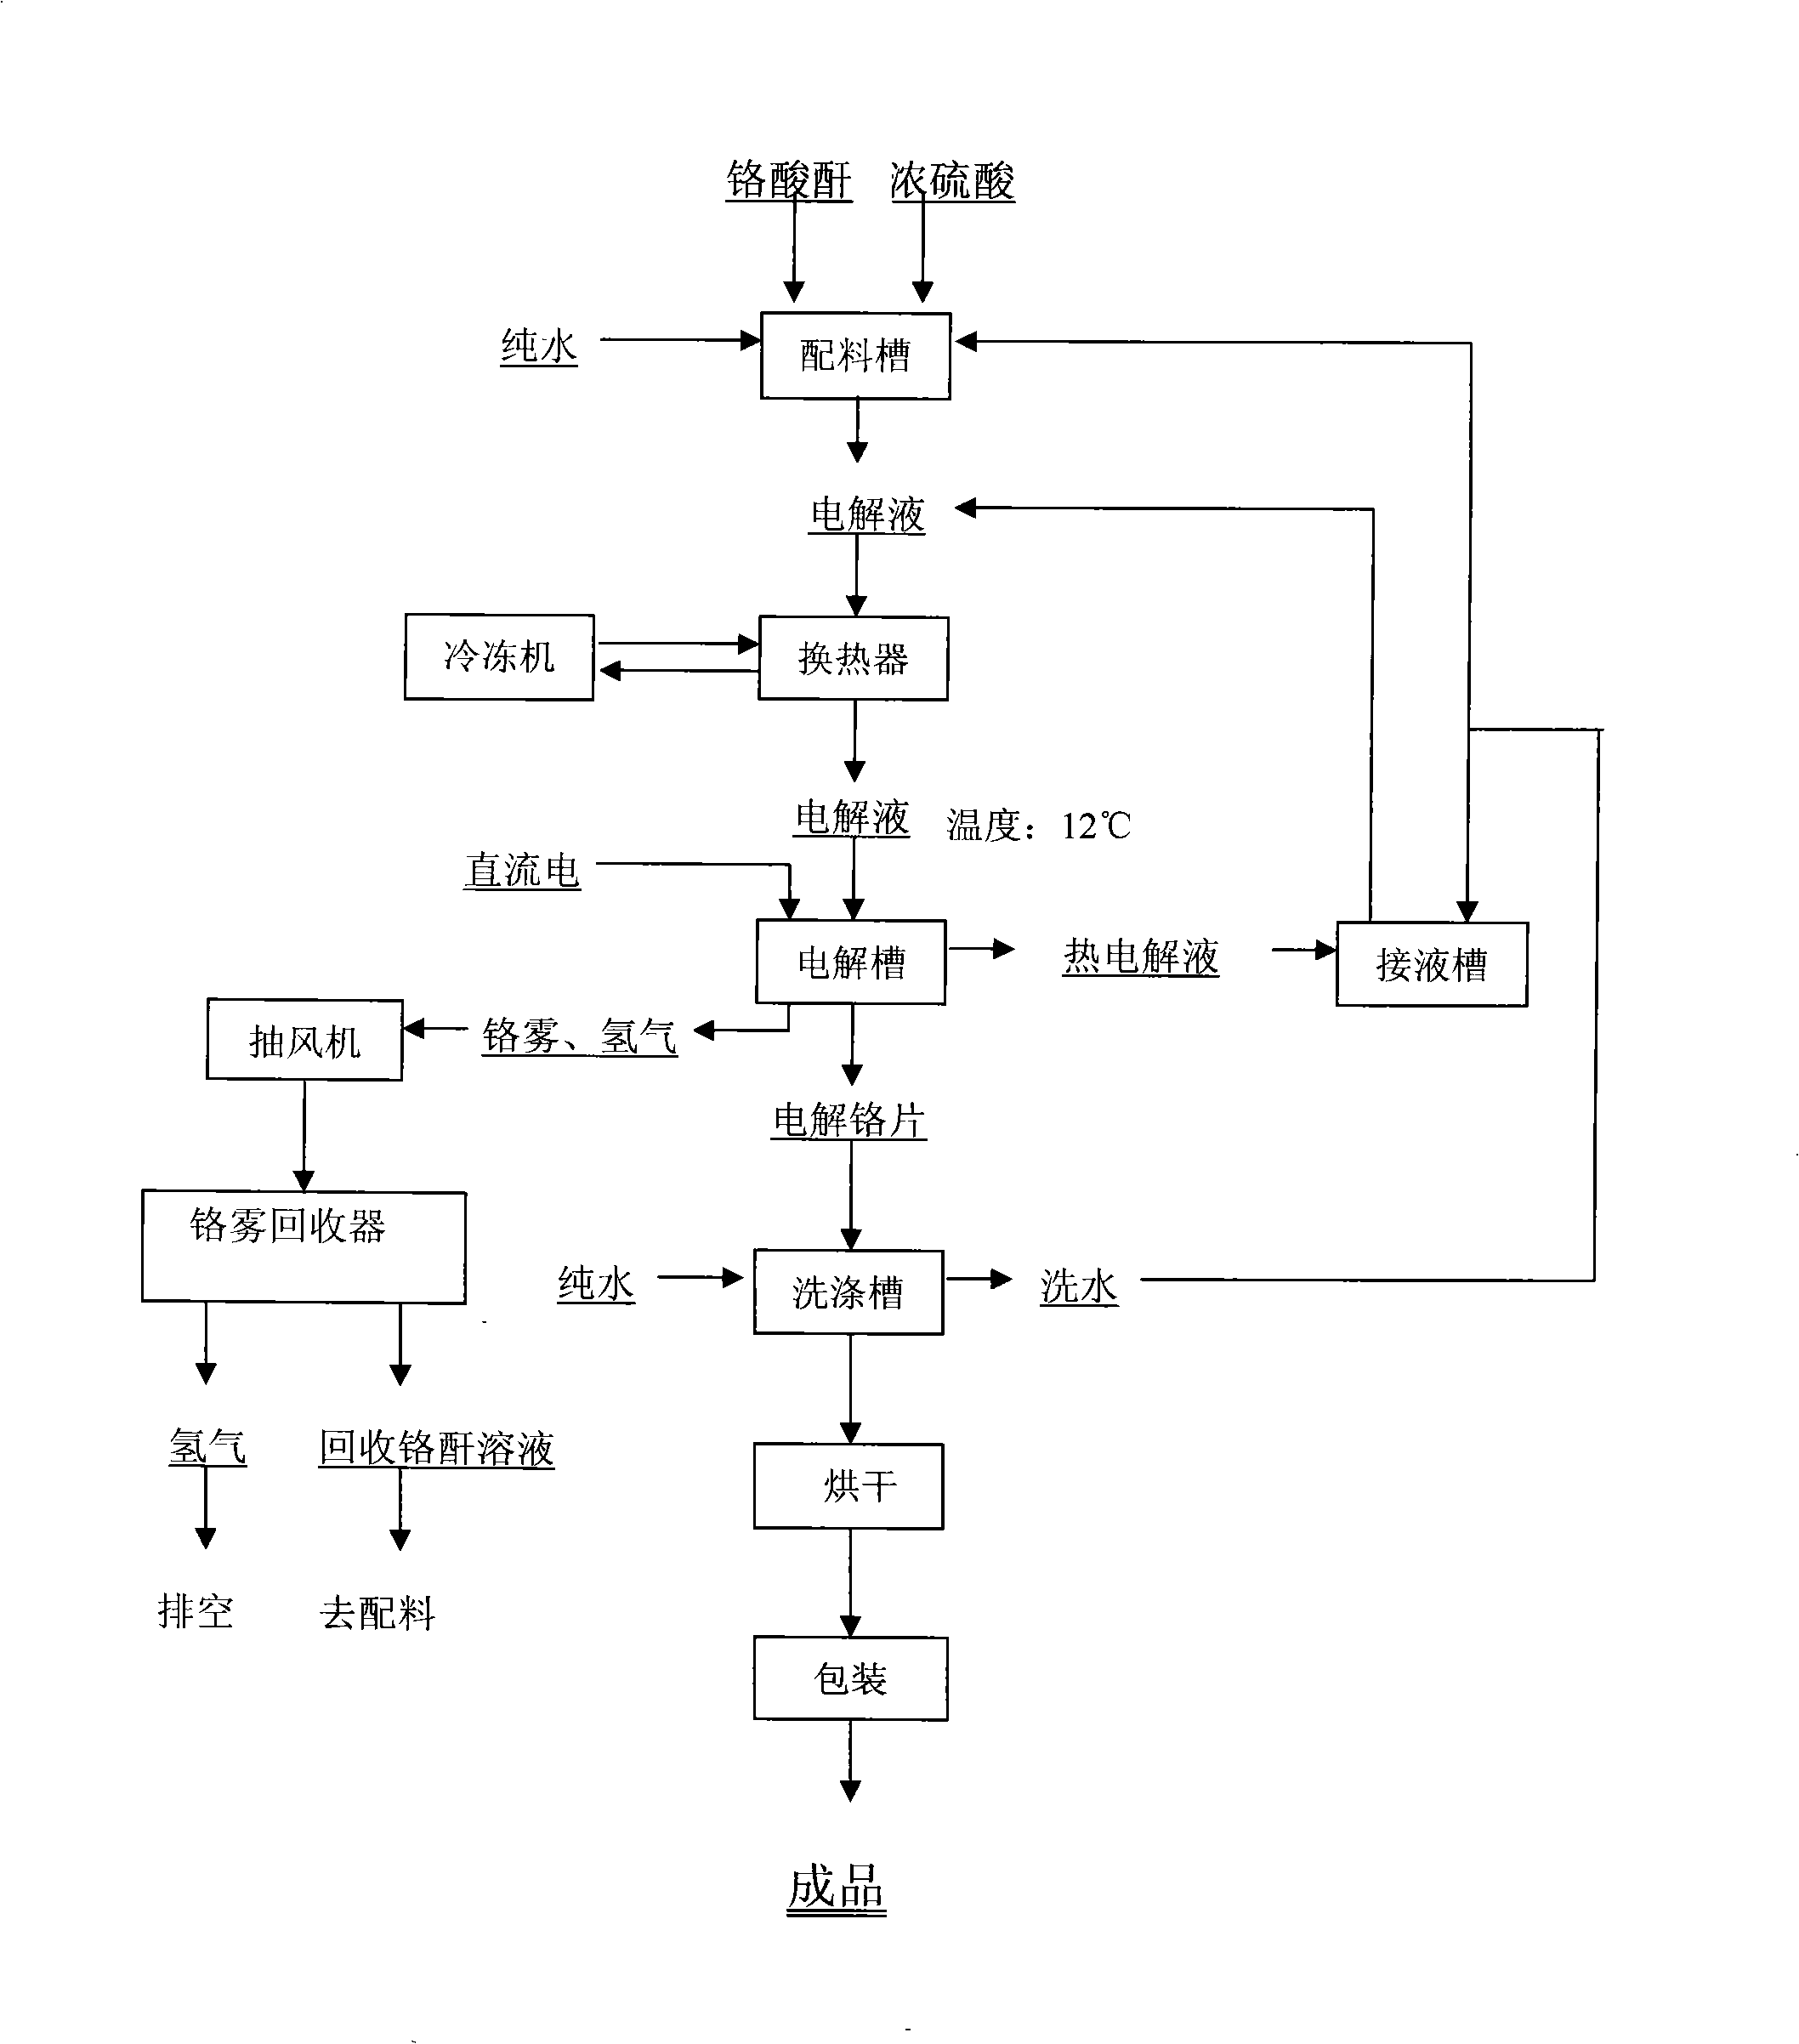 Method for producing high-purity metal chromium by electrolysis